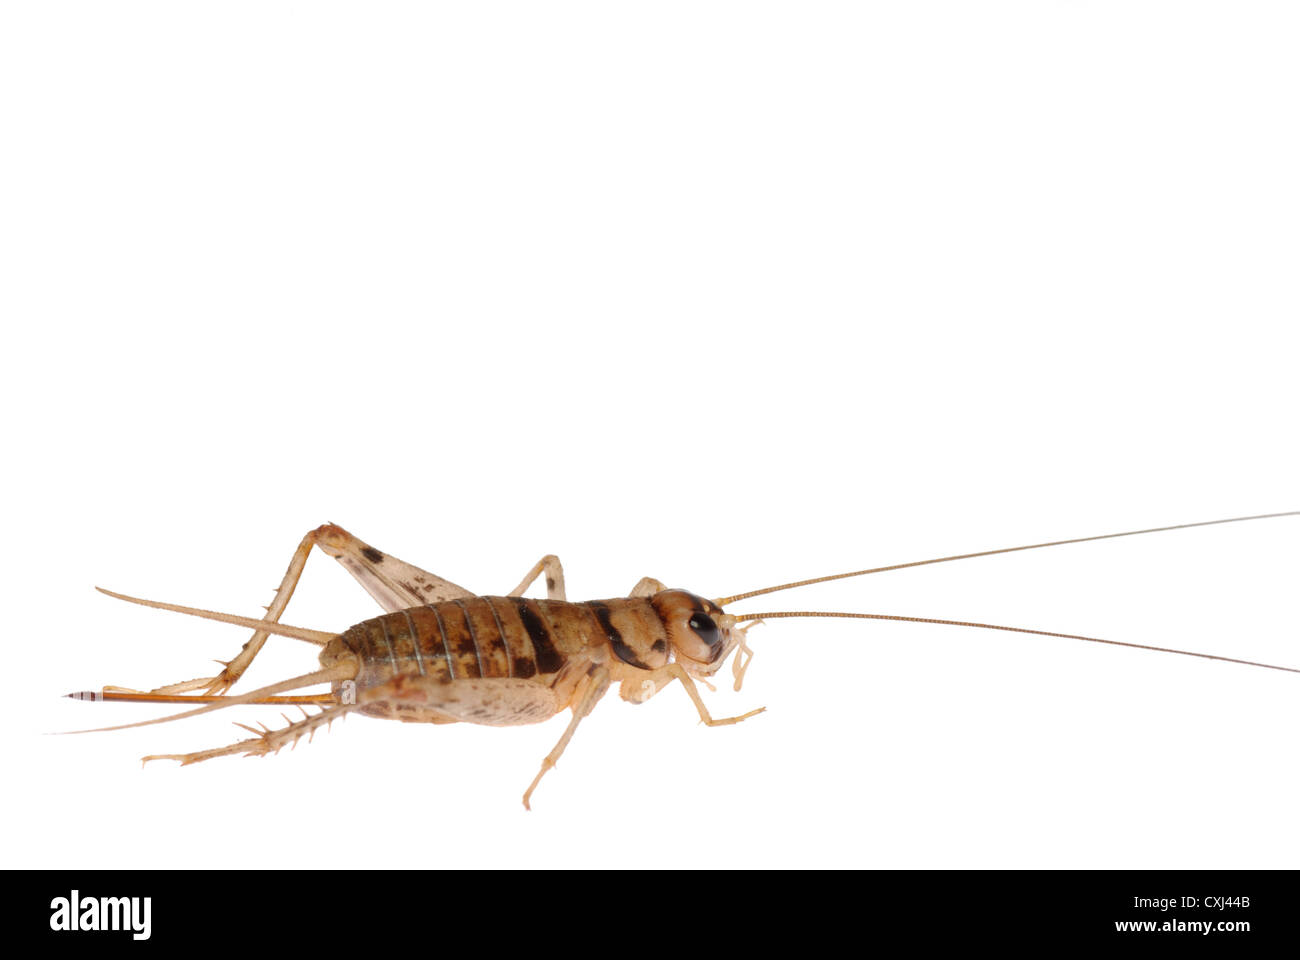 insect cricket Stock Photo